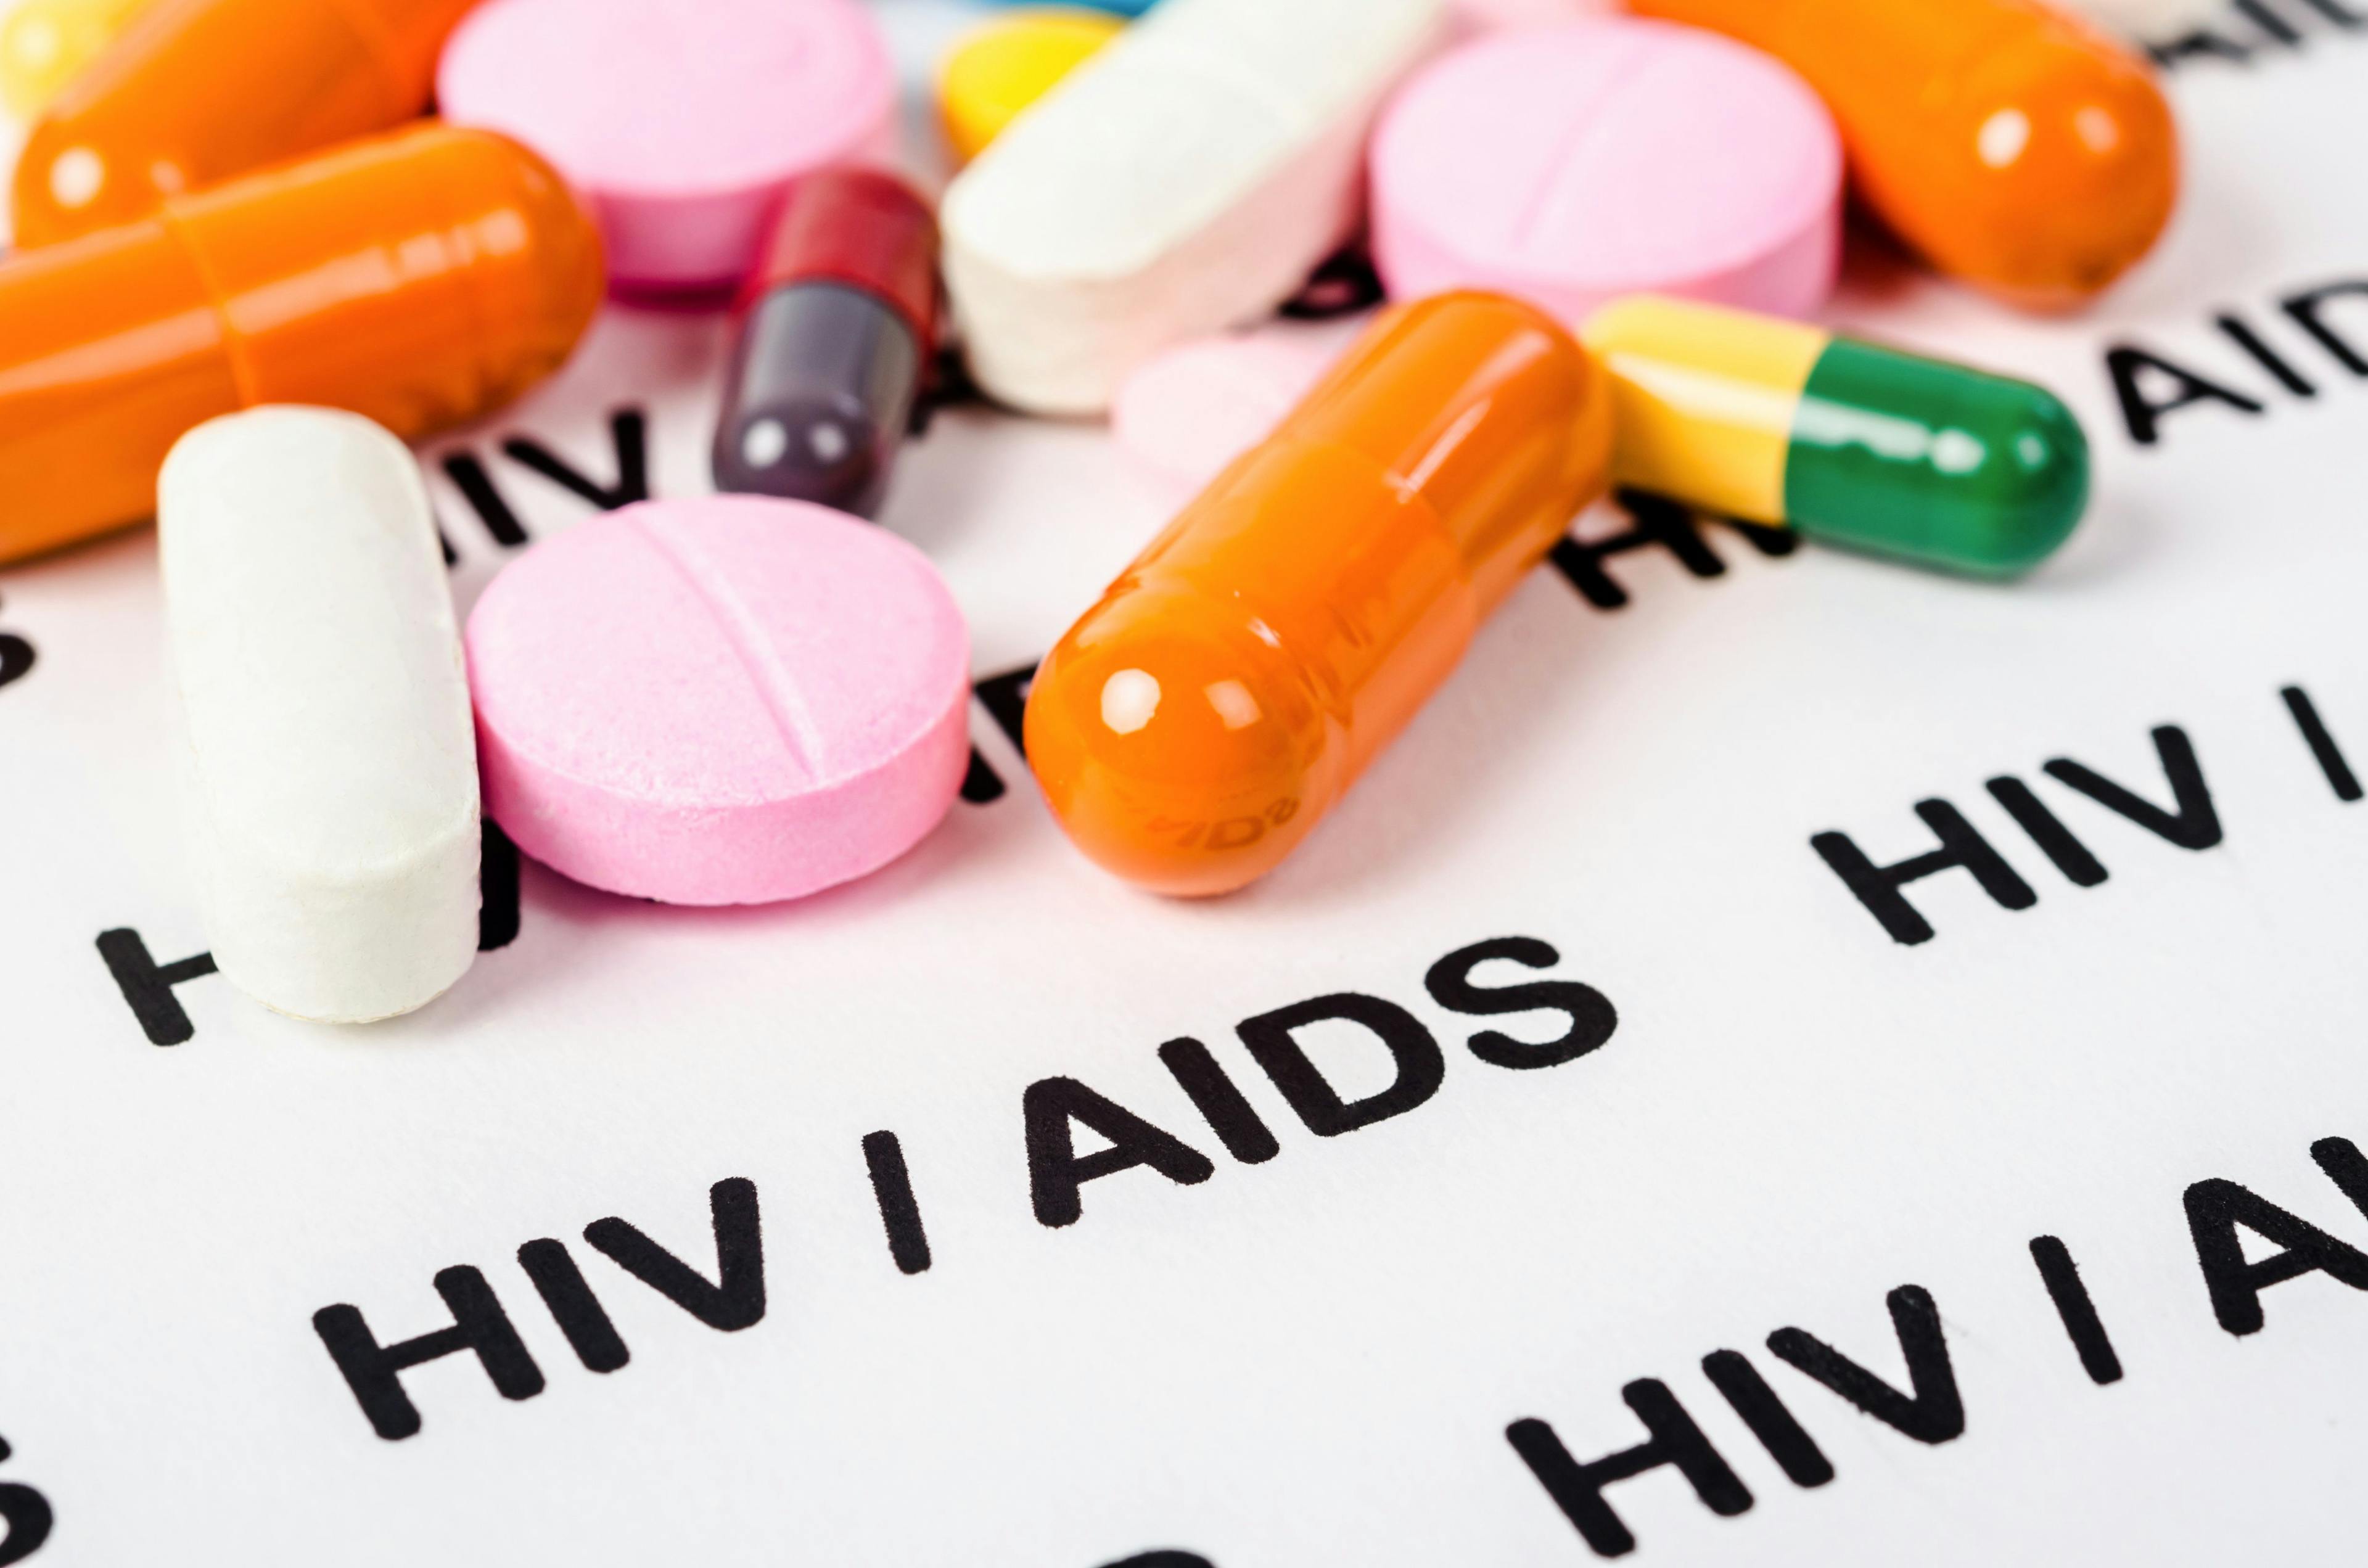 HIV As a Chronic Disease: Study Shows Link Between Neurocognitive Impairment, Quality of Life